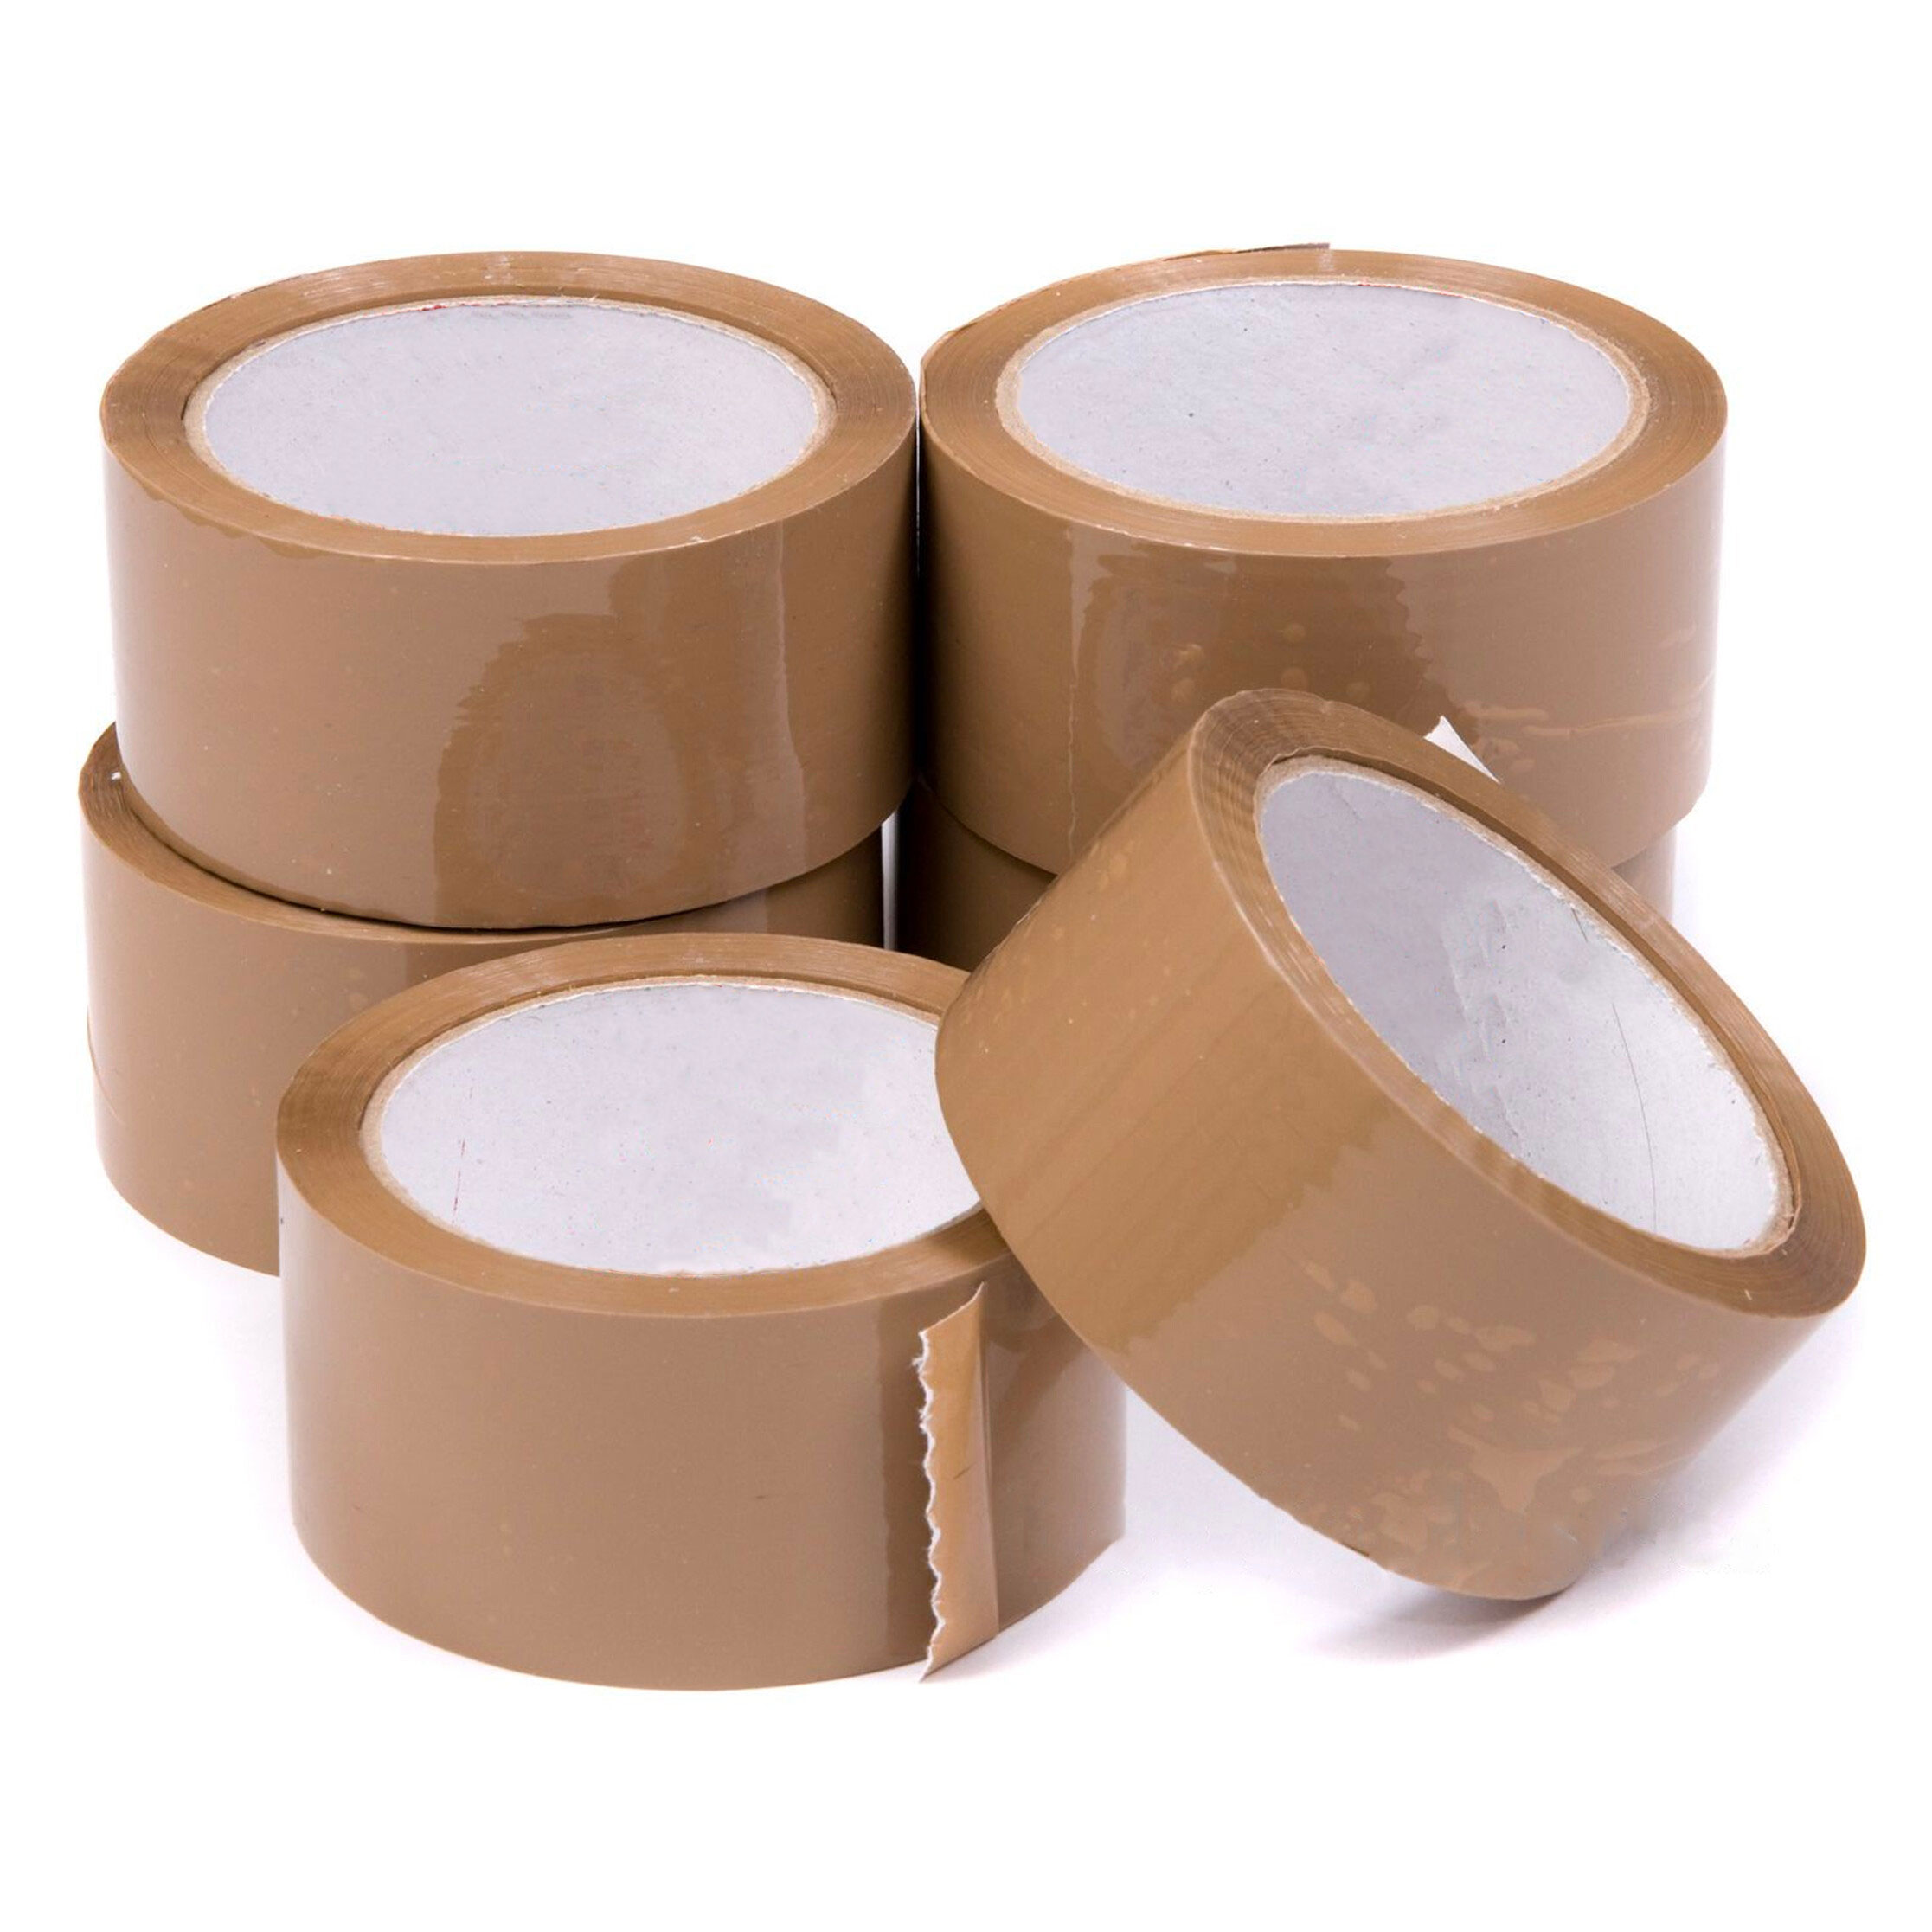 BROWN PARCEL PACKING TAPE 50m x 48mm PACKAGING SELLOTAPE SEALING 